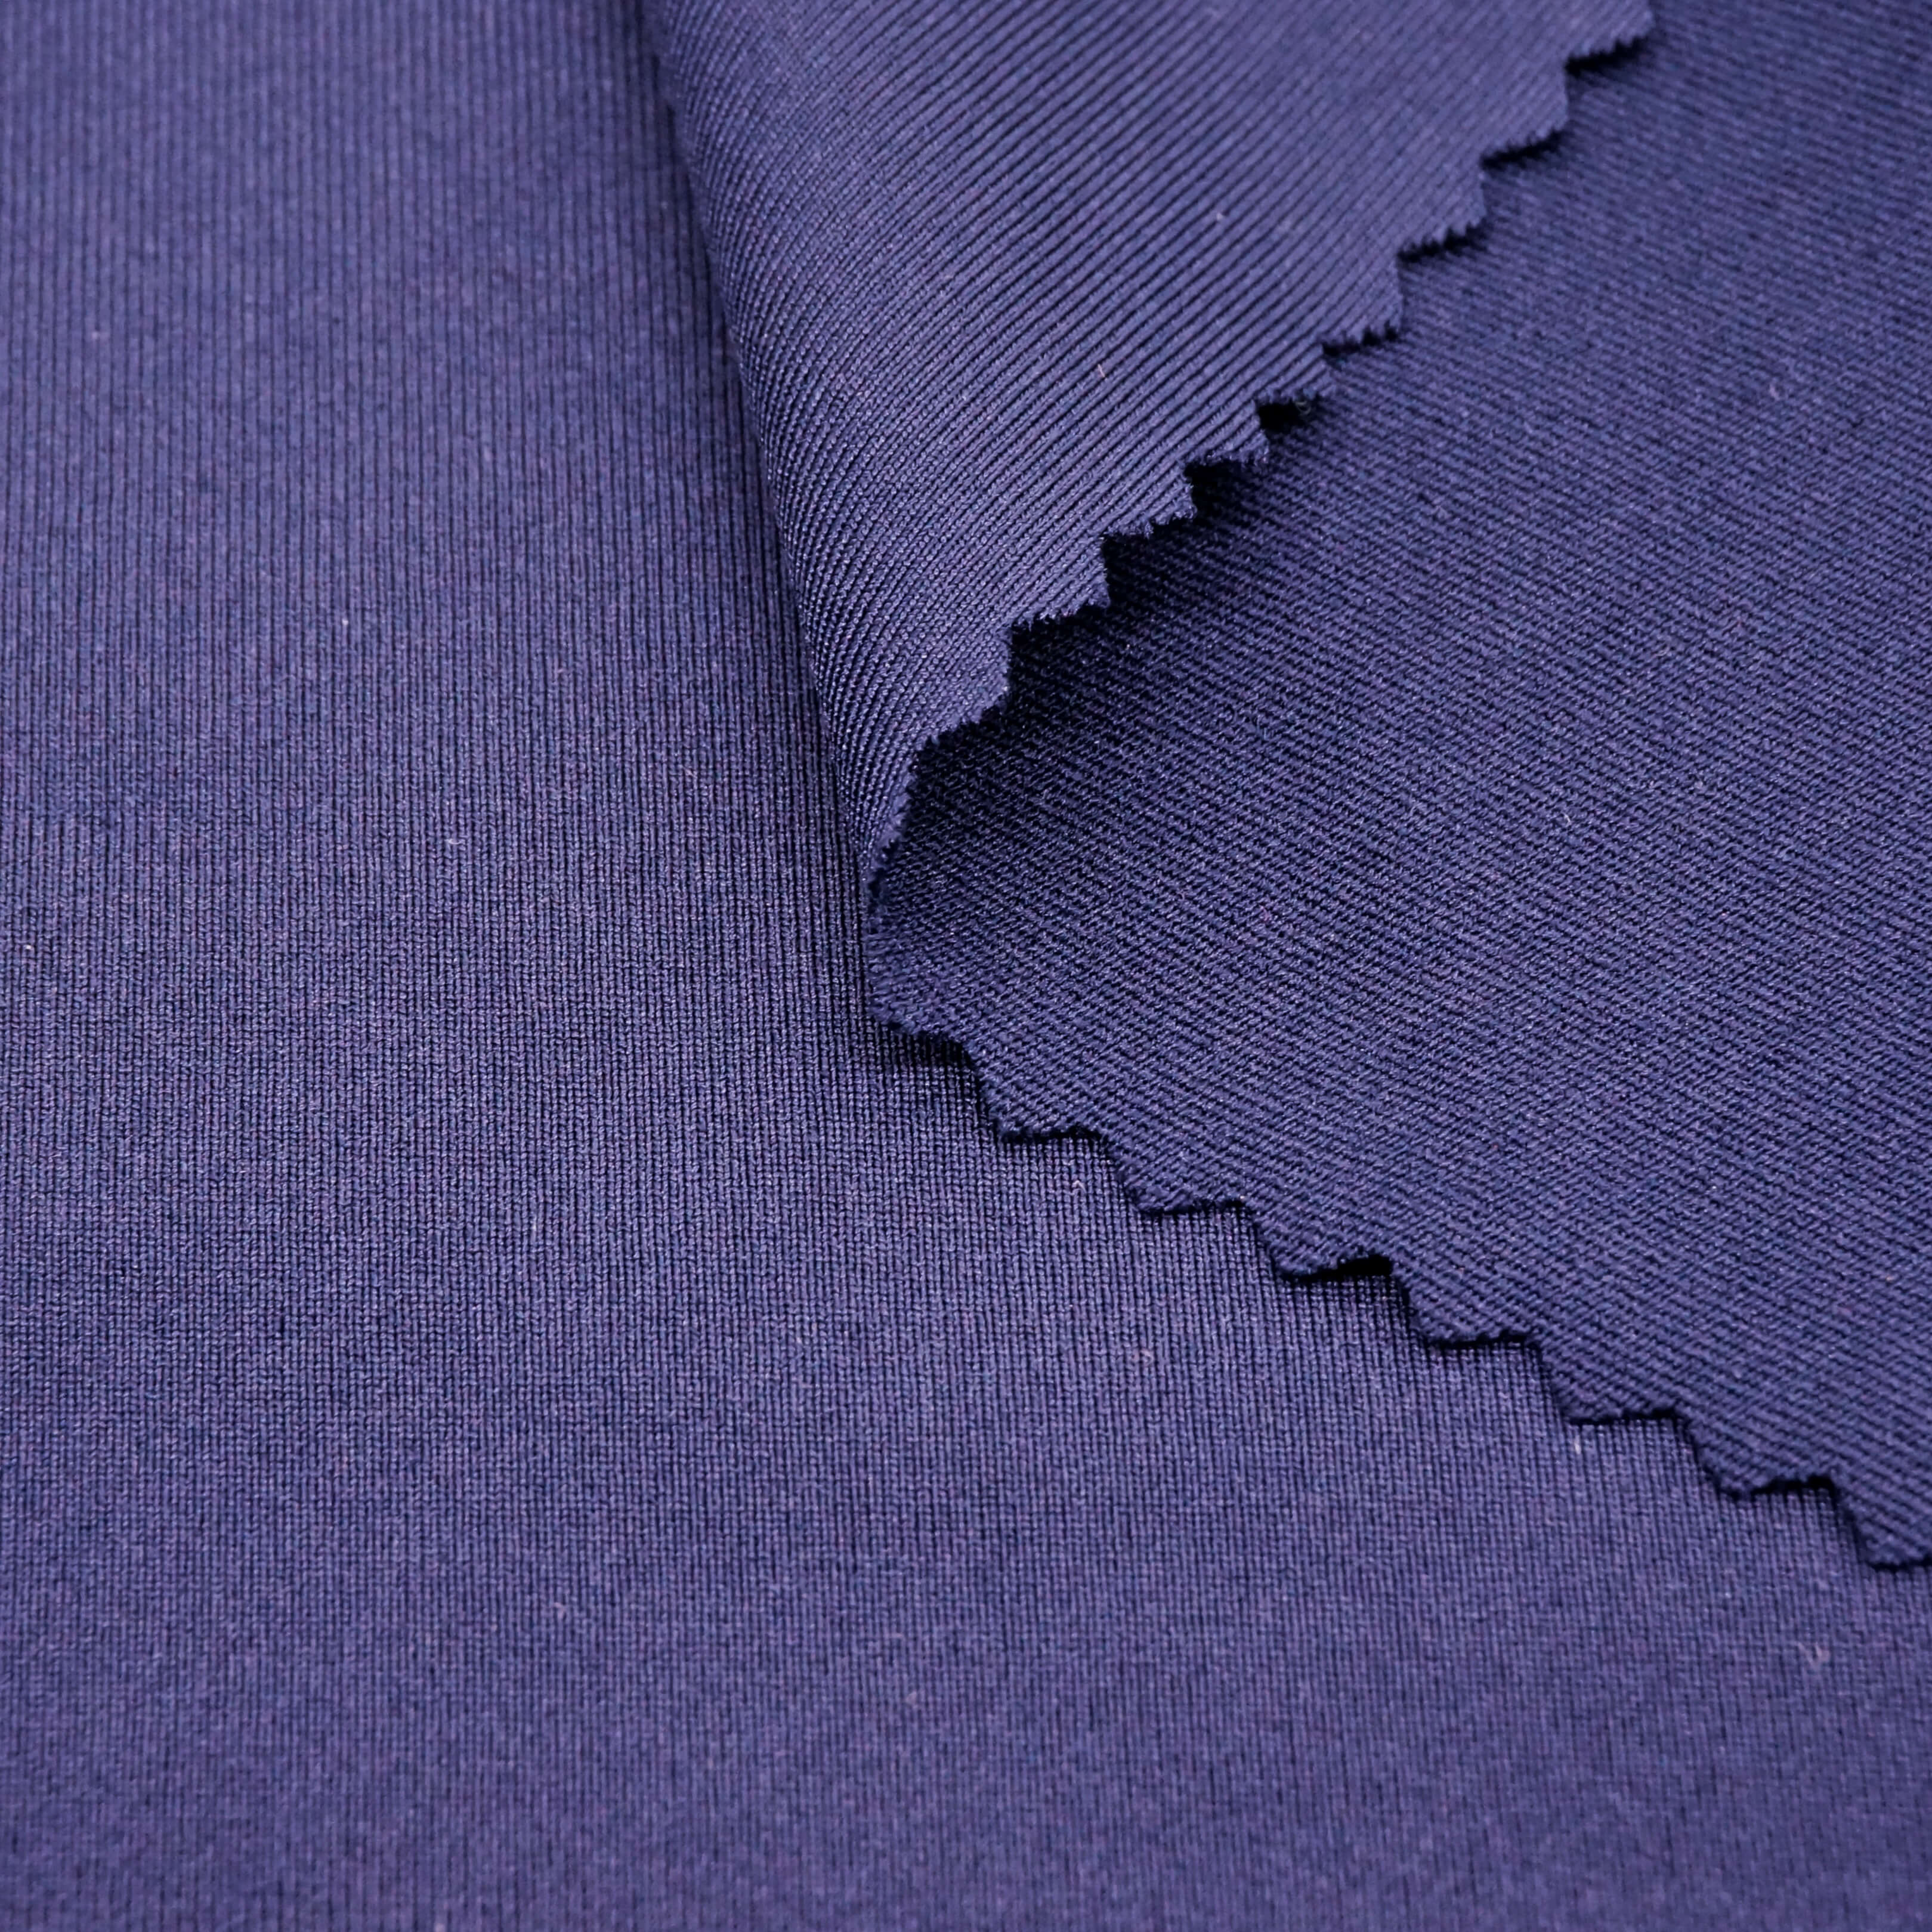 Warming Polyester Spandex Jersey Wicking Fabric